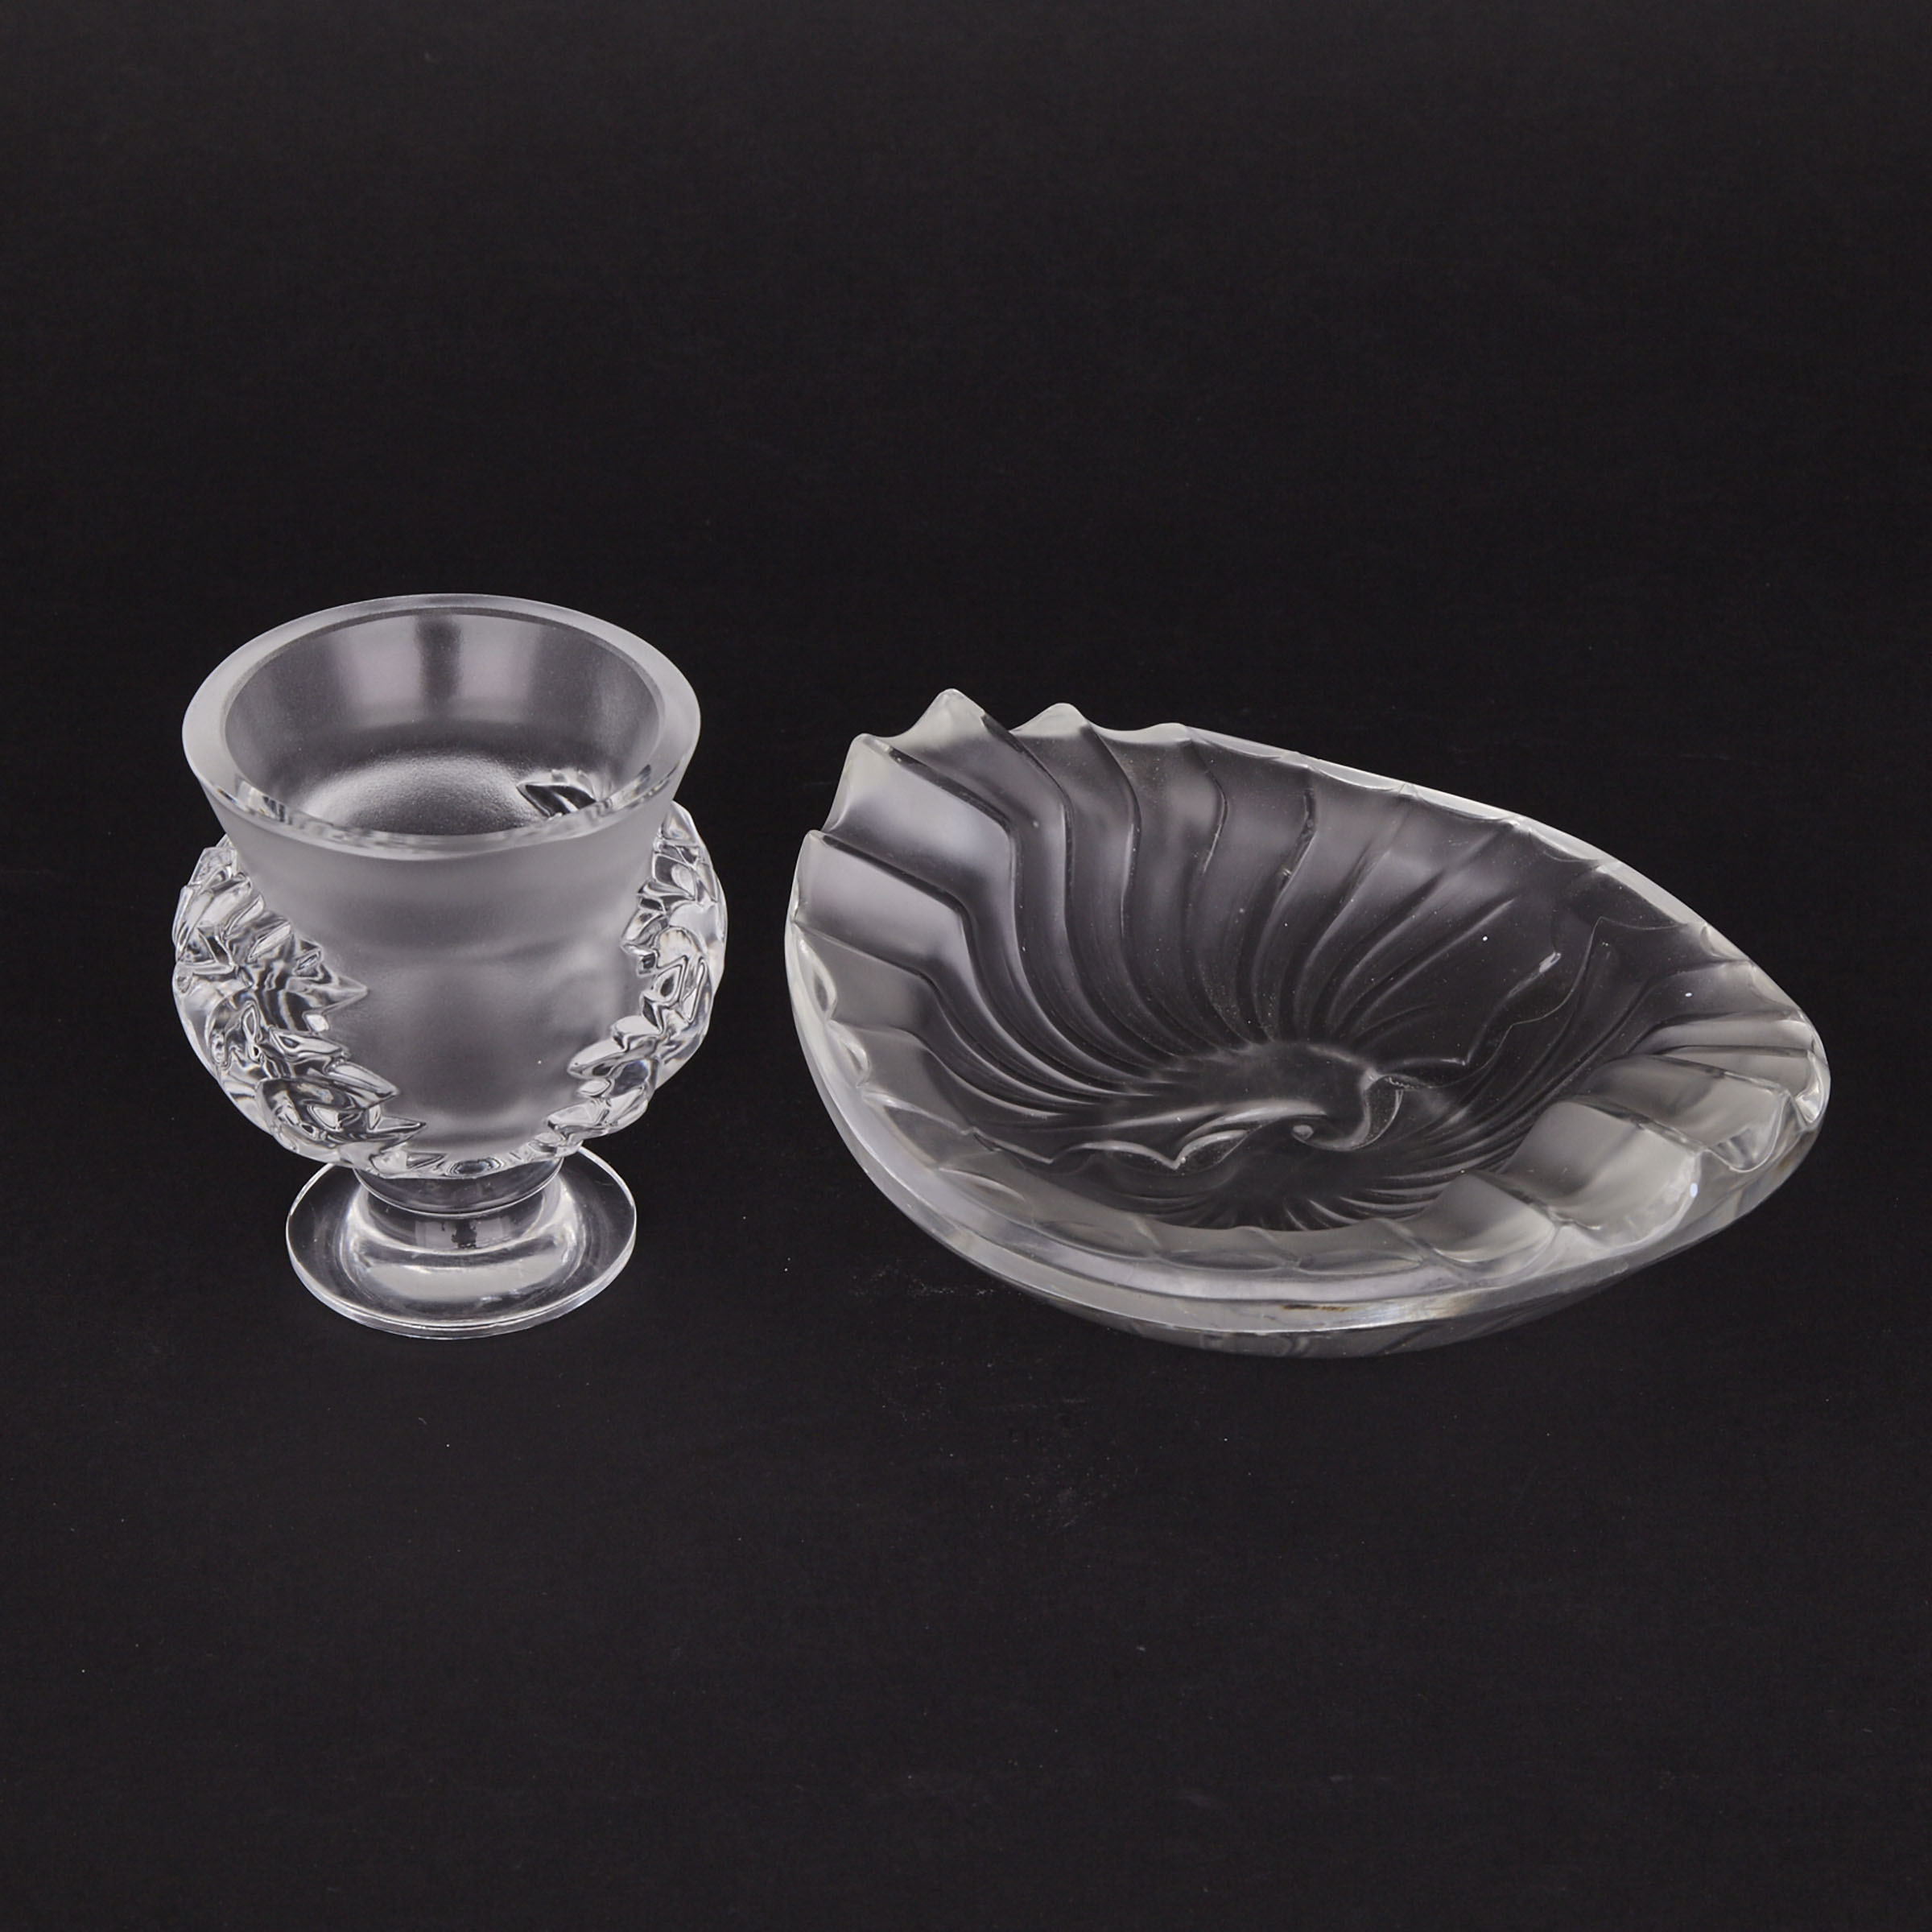 ‘St. Cloud’ and ‘Nancy’, Lalique Moulded and Frosted Glass Small Vase and Oval Dish, post-1945